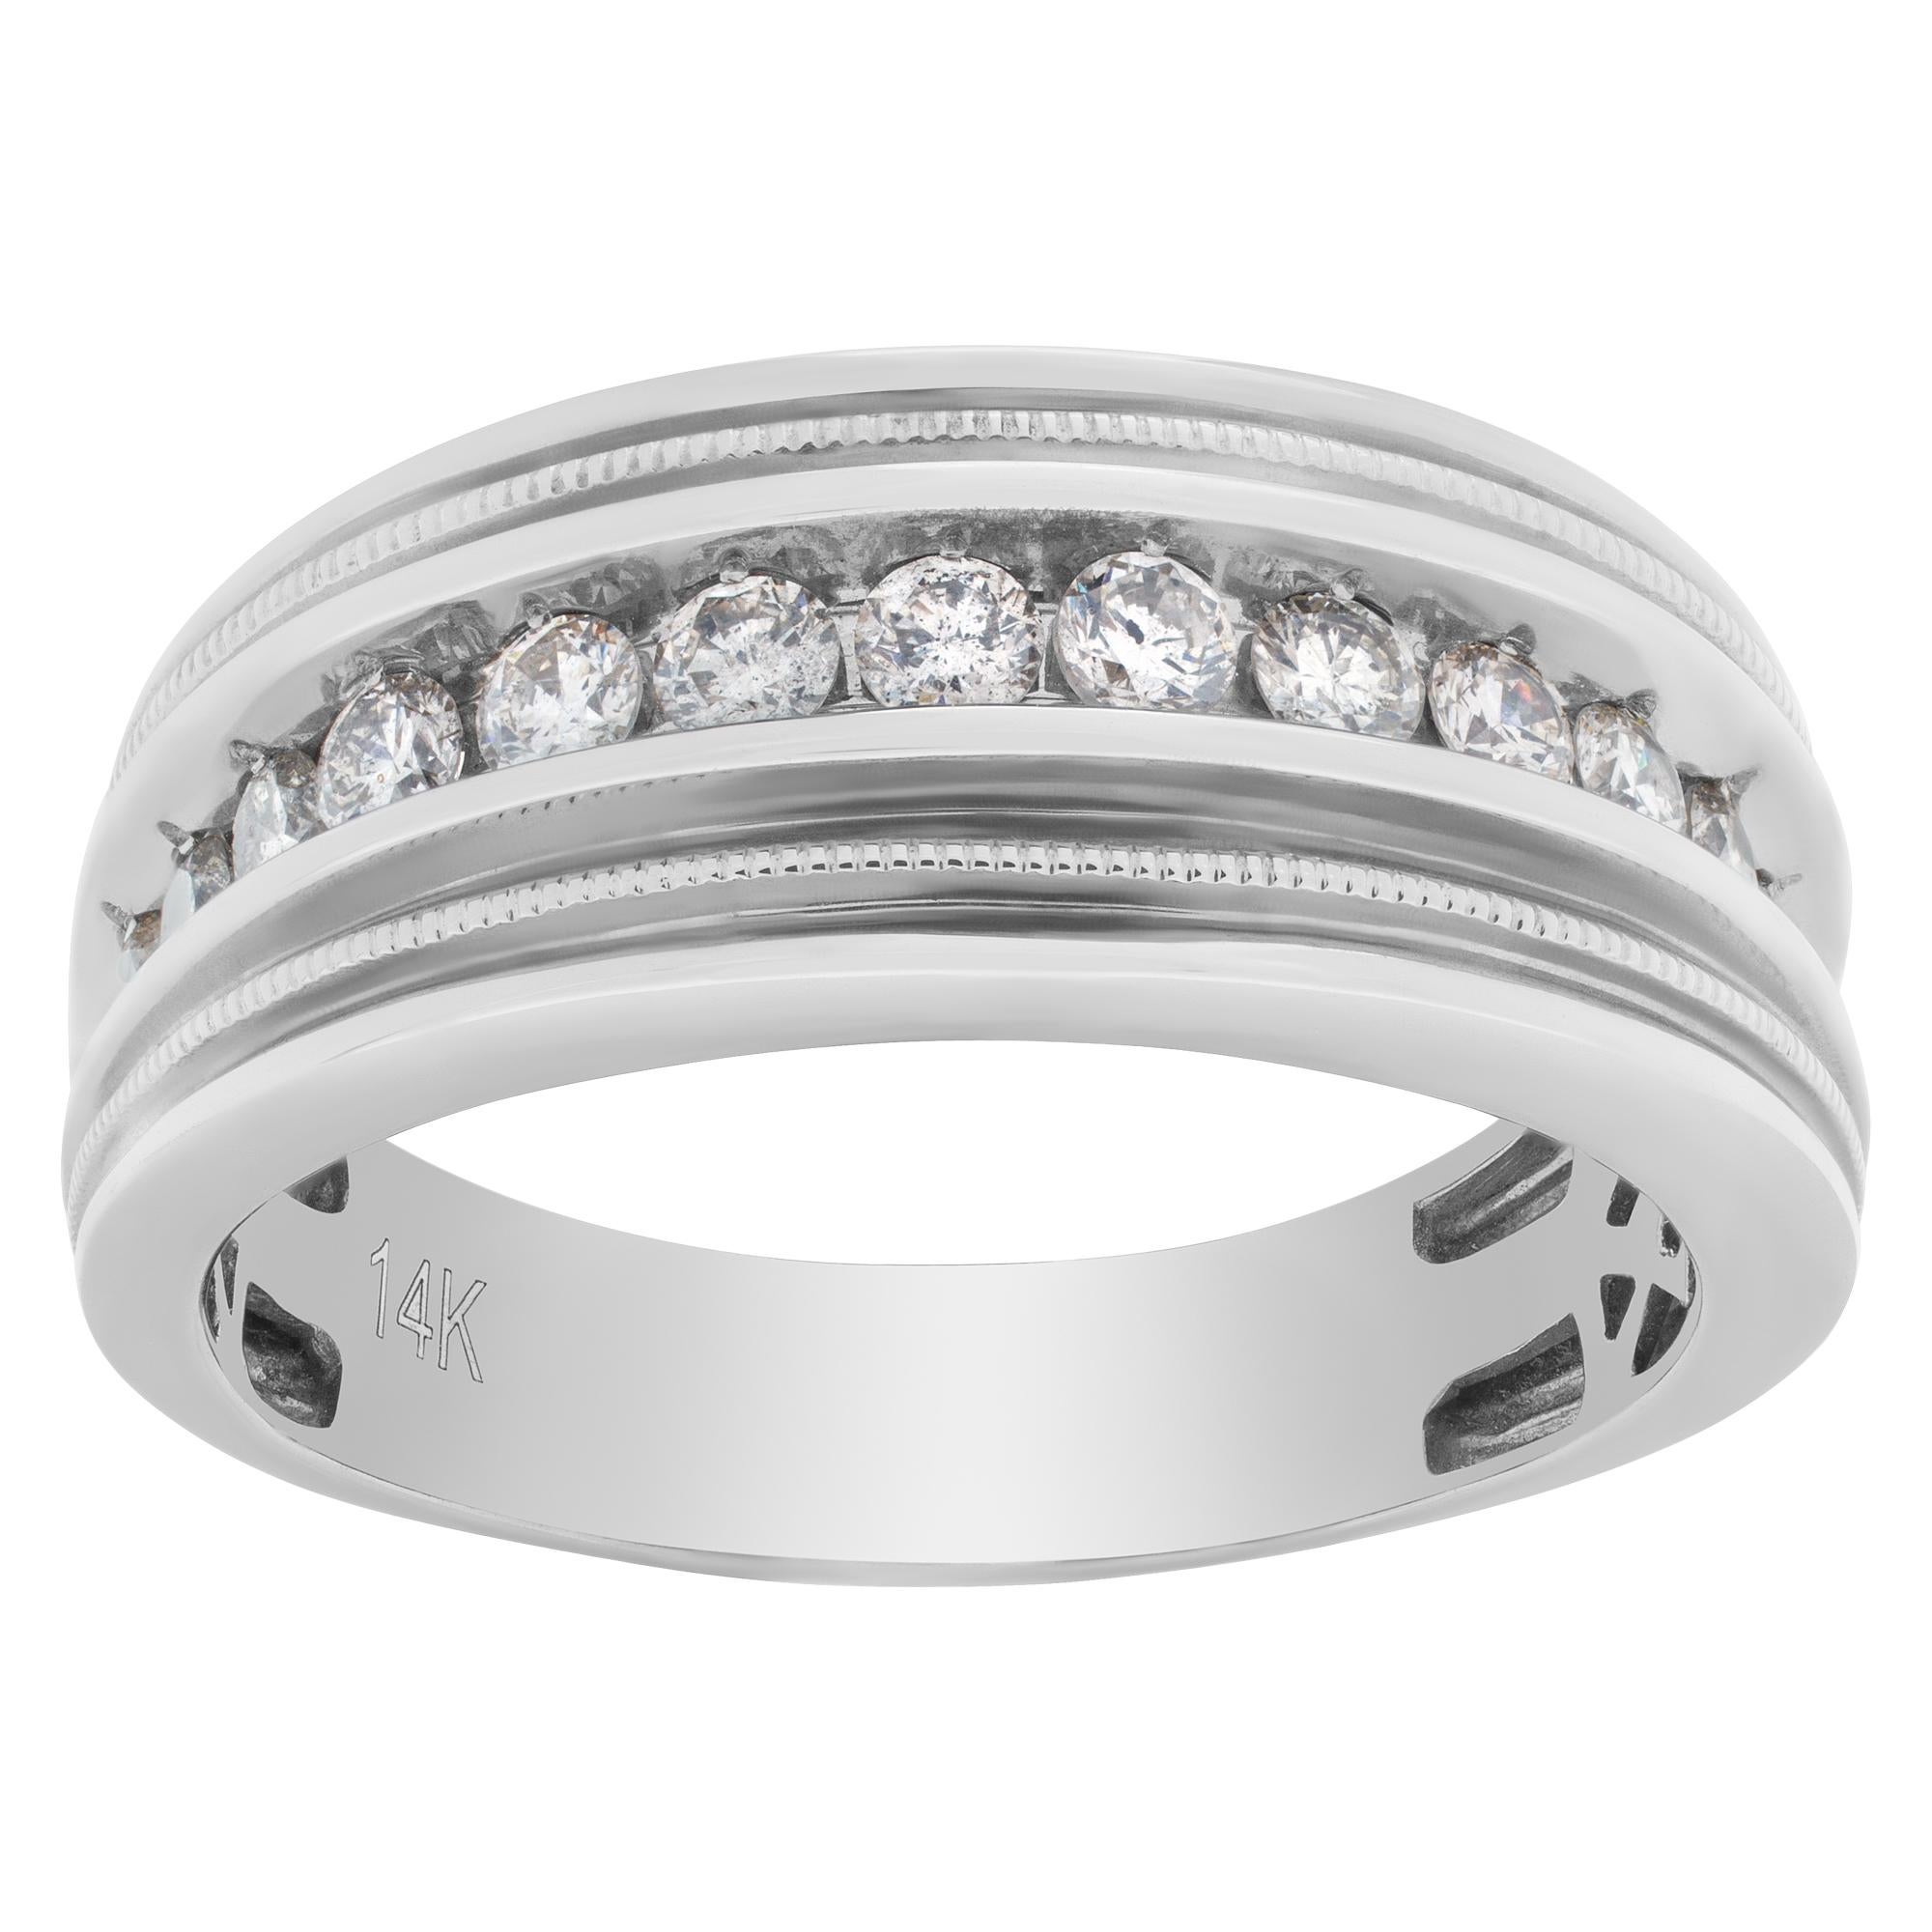 Diamond ring in 14k white gold with approximately 1 carat full cut round brilliant diamonds. Estimate: G-H color, VS-SI clarity. Size 12.25

This Diamond ring is currently size 12.25 and some items can be sized up or down, please ask! It weighs 6.6